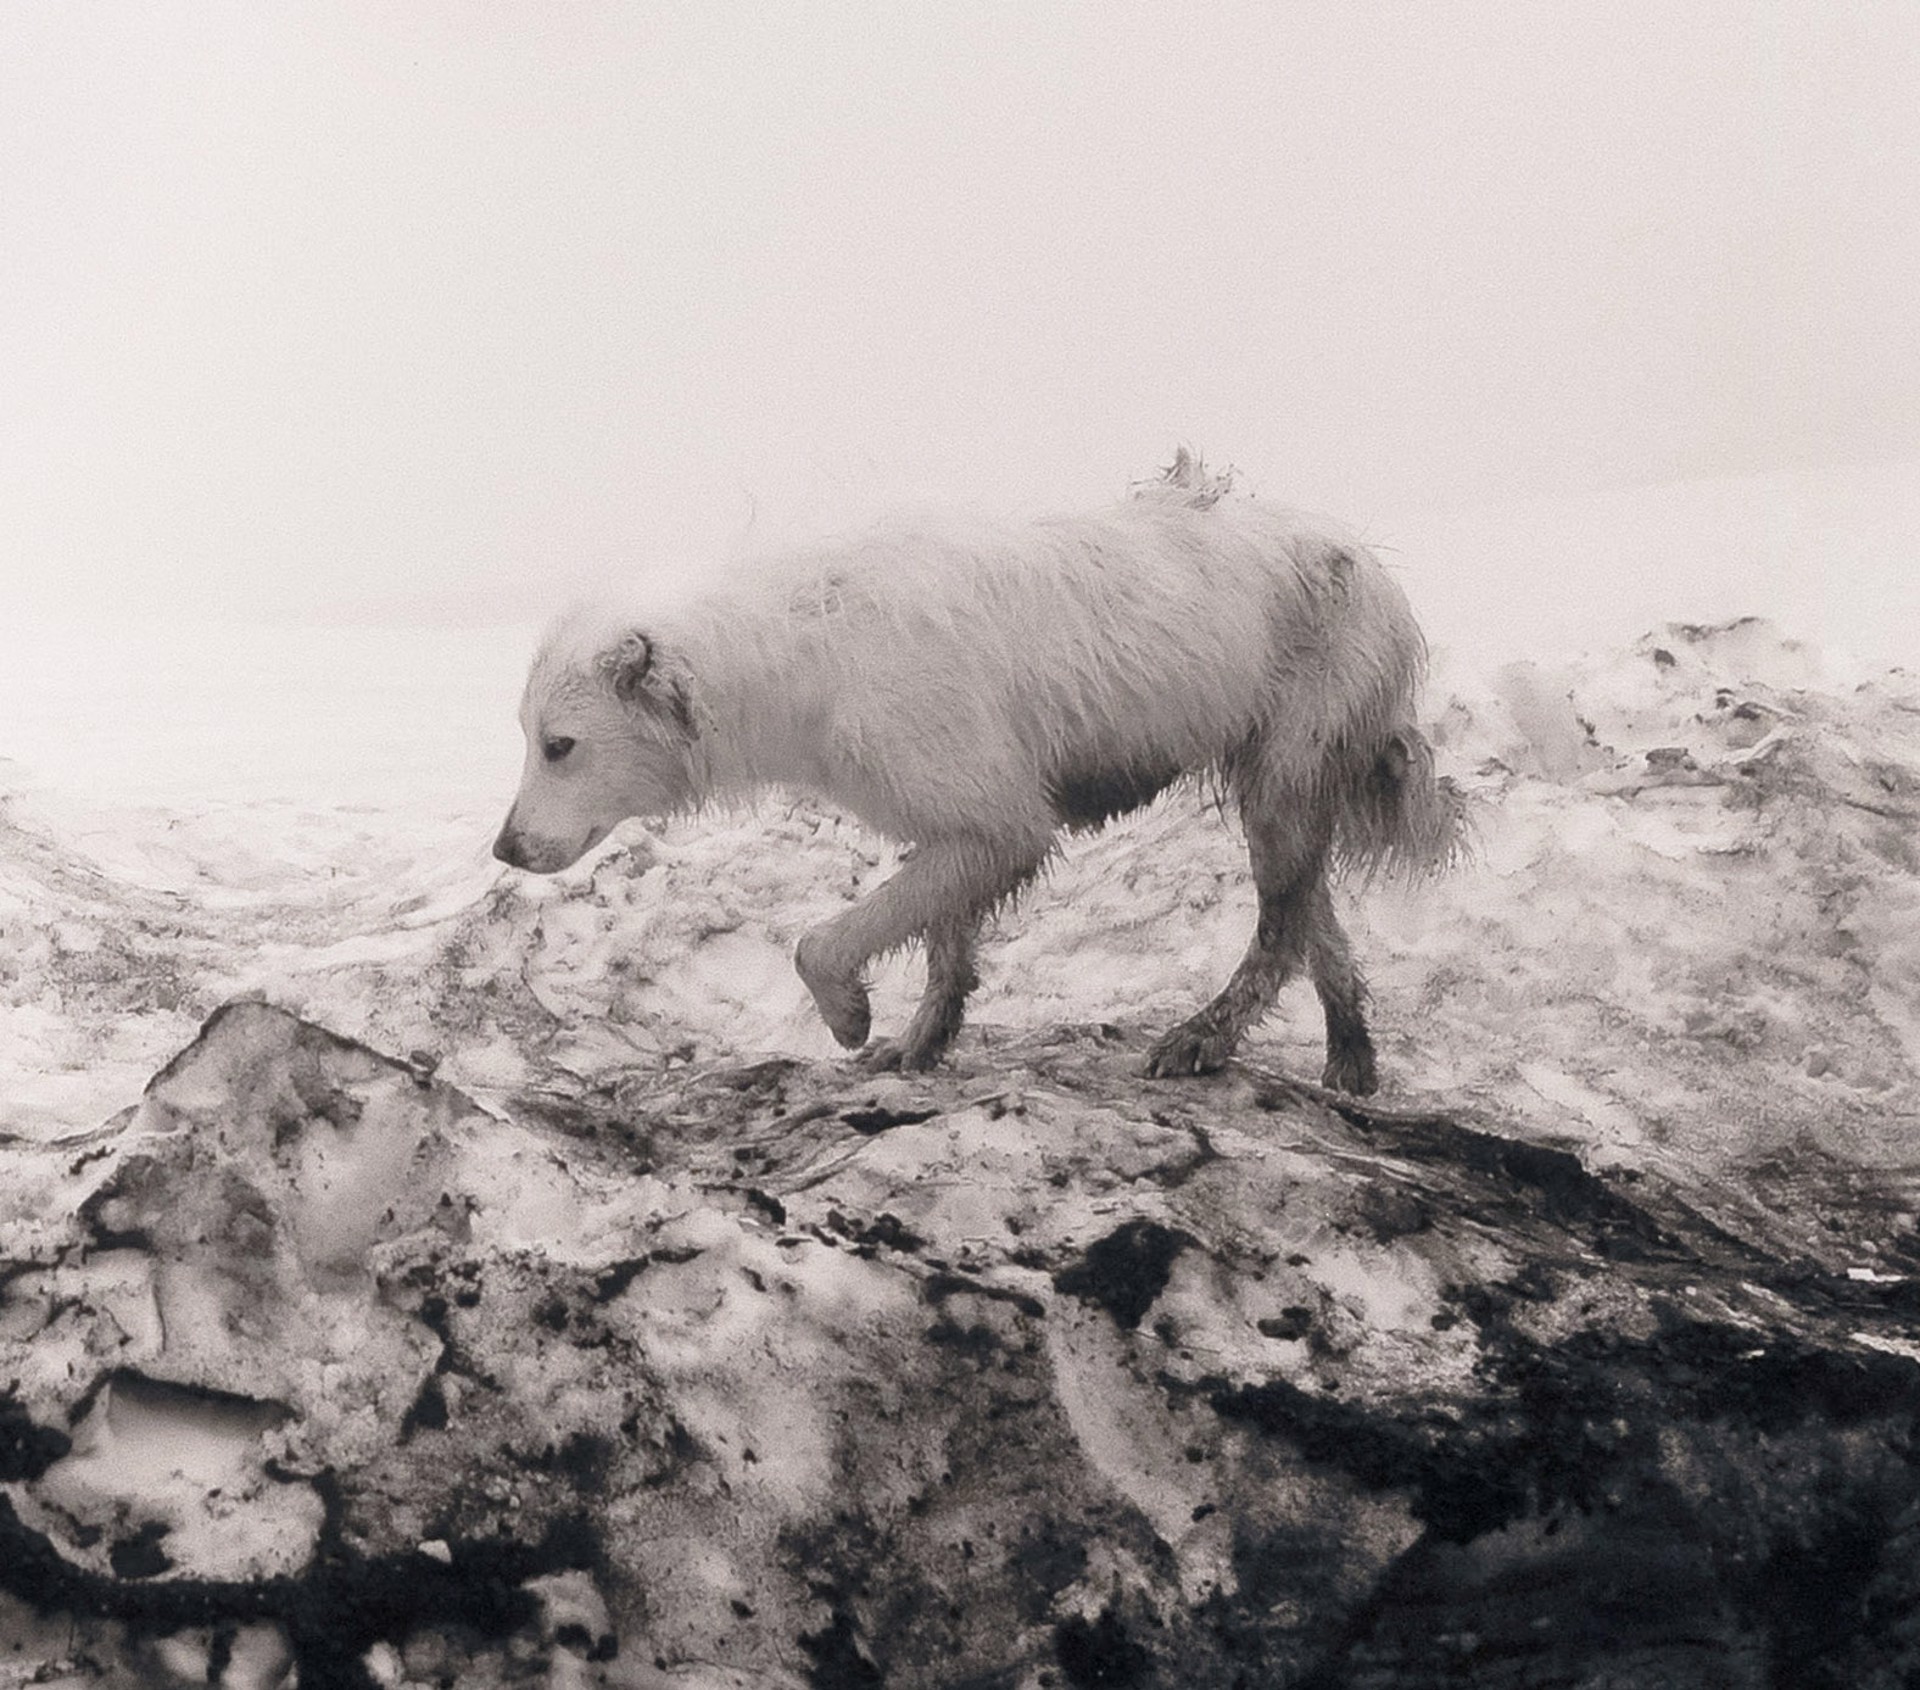 Ice-Covered Guardian Dog on Glacier by Philip Holsinger